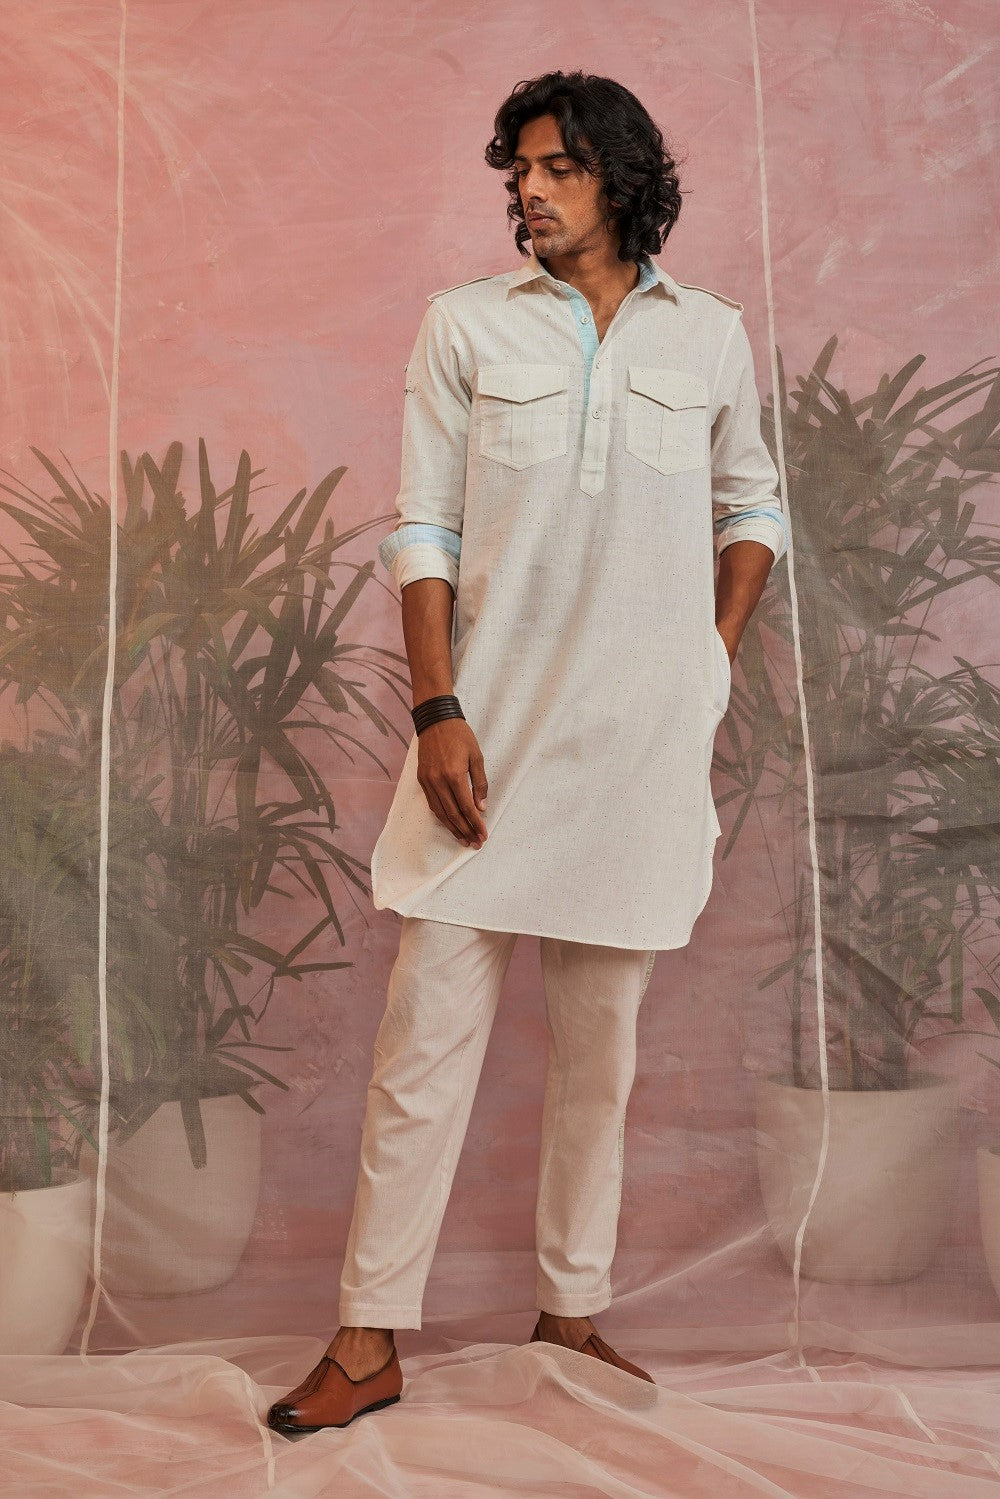 Off-White Pathani Kurta at Kamakhyaa by Charkhee. This item is Casual Wear, Cotton, For Father, Kurtas, Menswear, Natural, Regular Fit, Textured, Tops, White